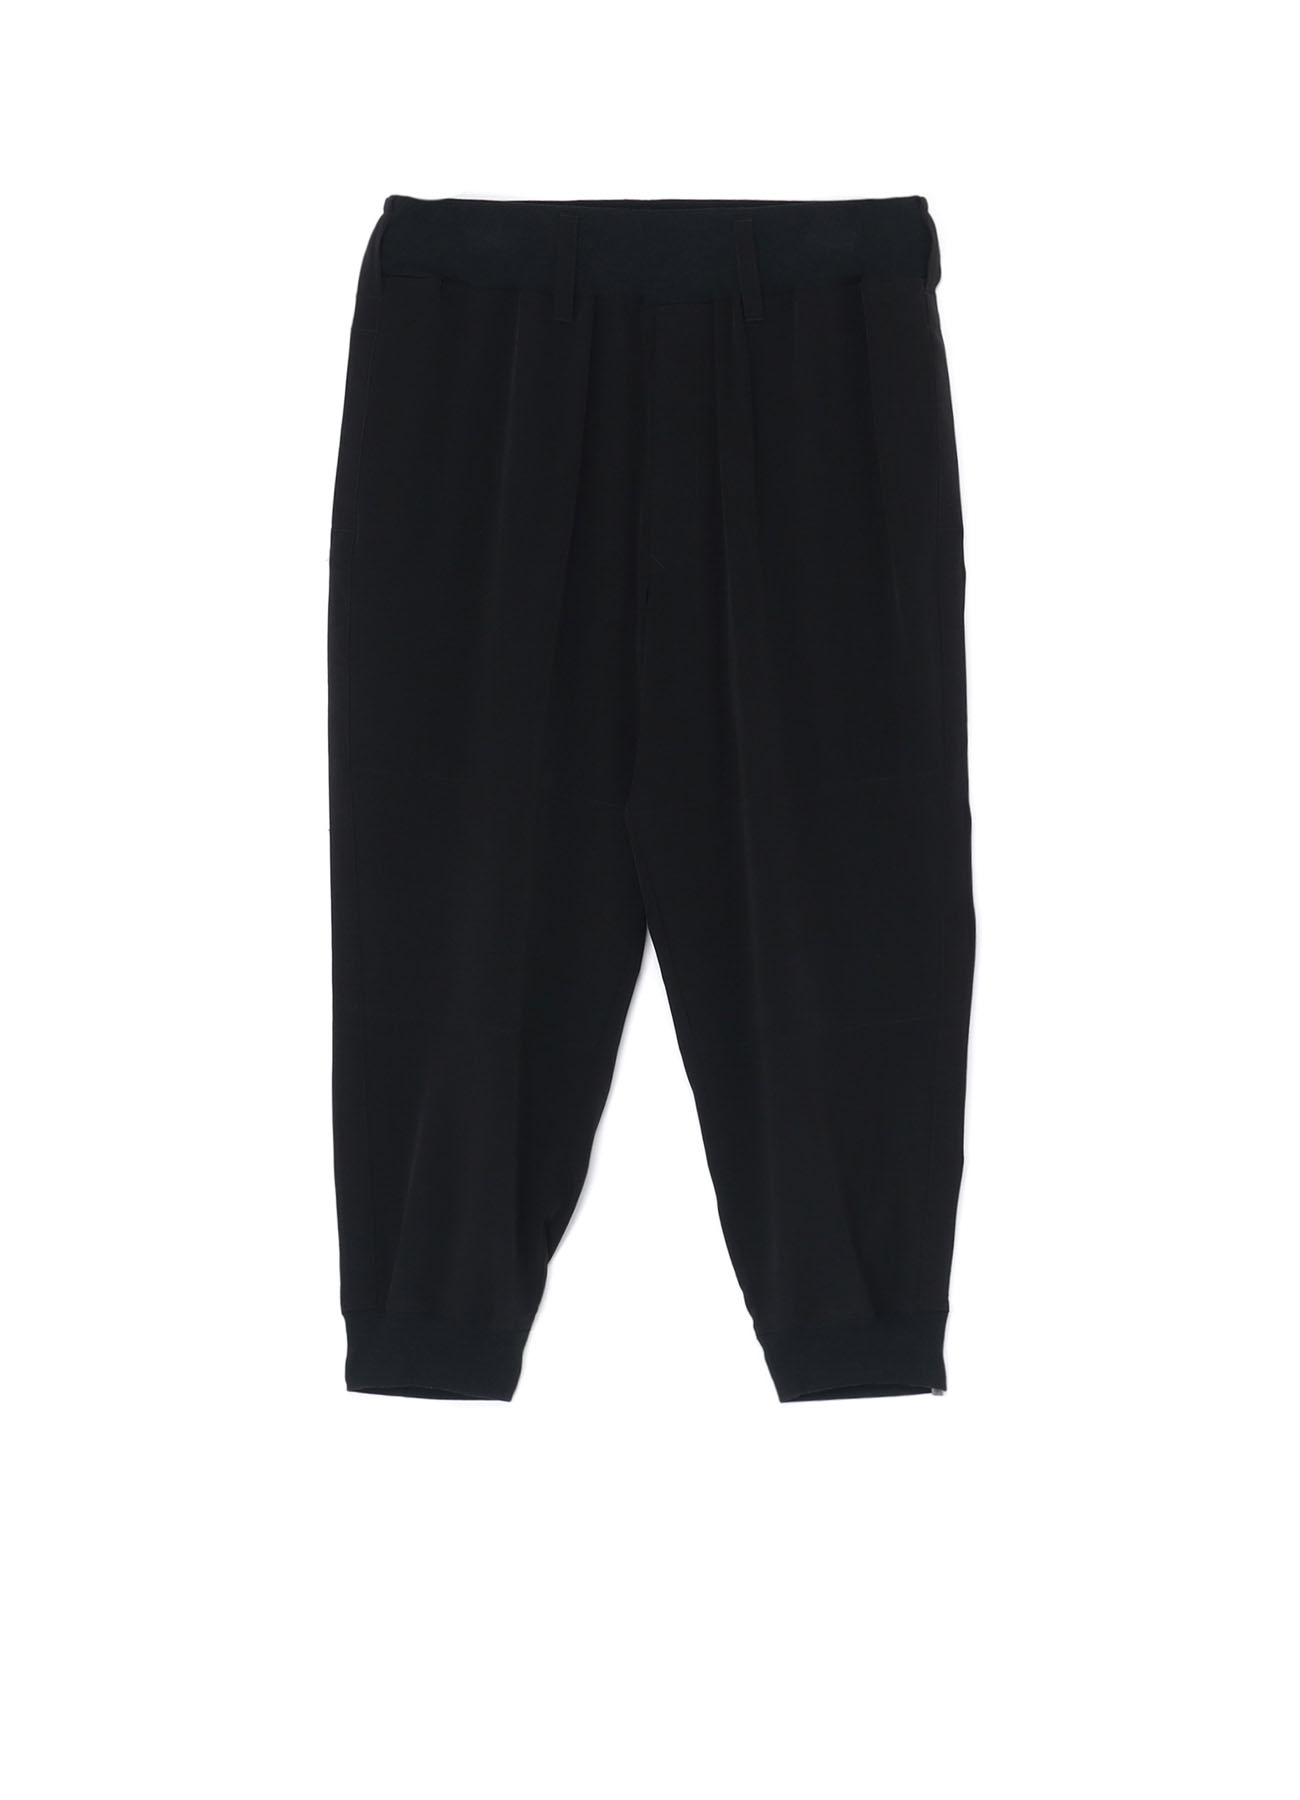 TA TUXEDO Sweat pants with side tapes